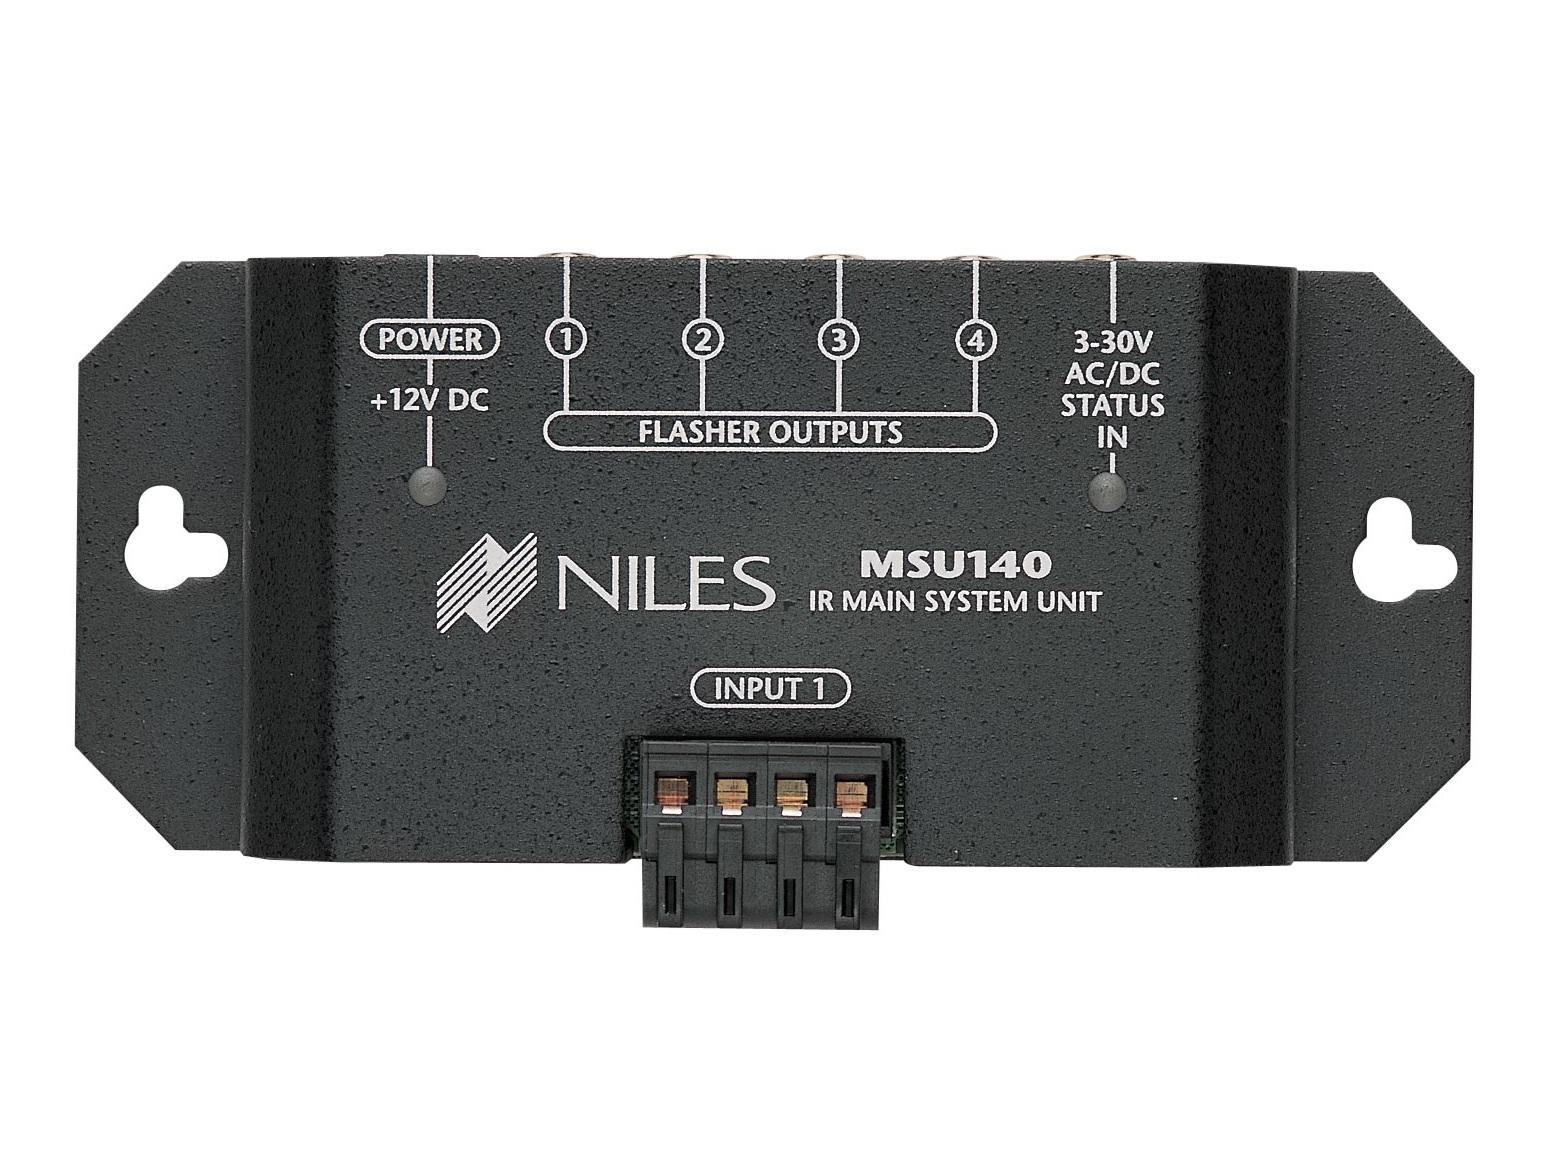 MSU140 1x4 IR Repeater System for Single Zone Applications (IRH610) by Niles